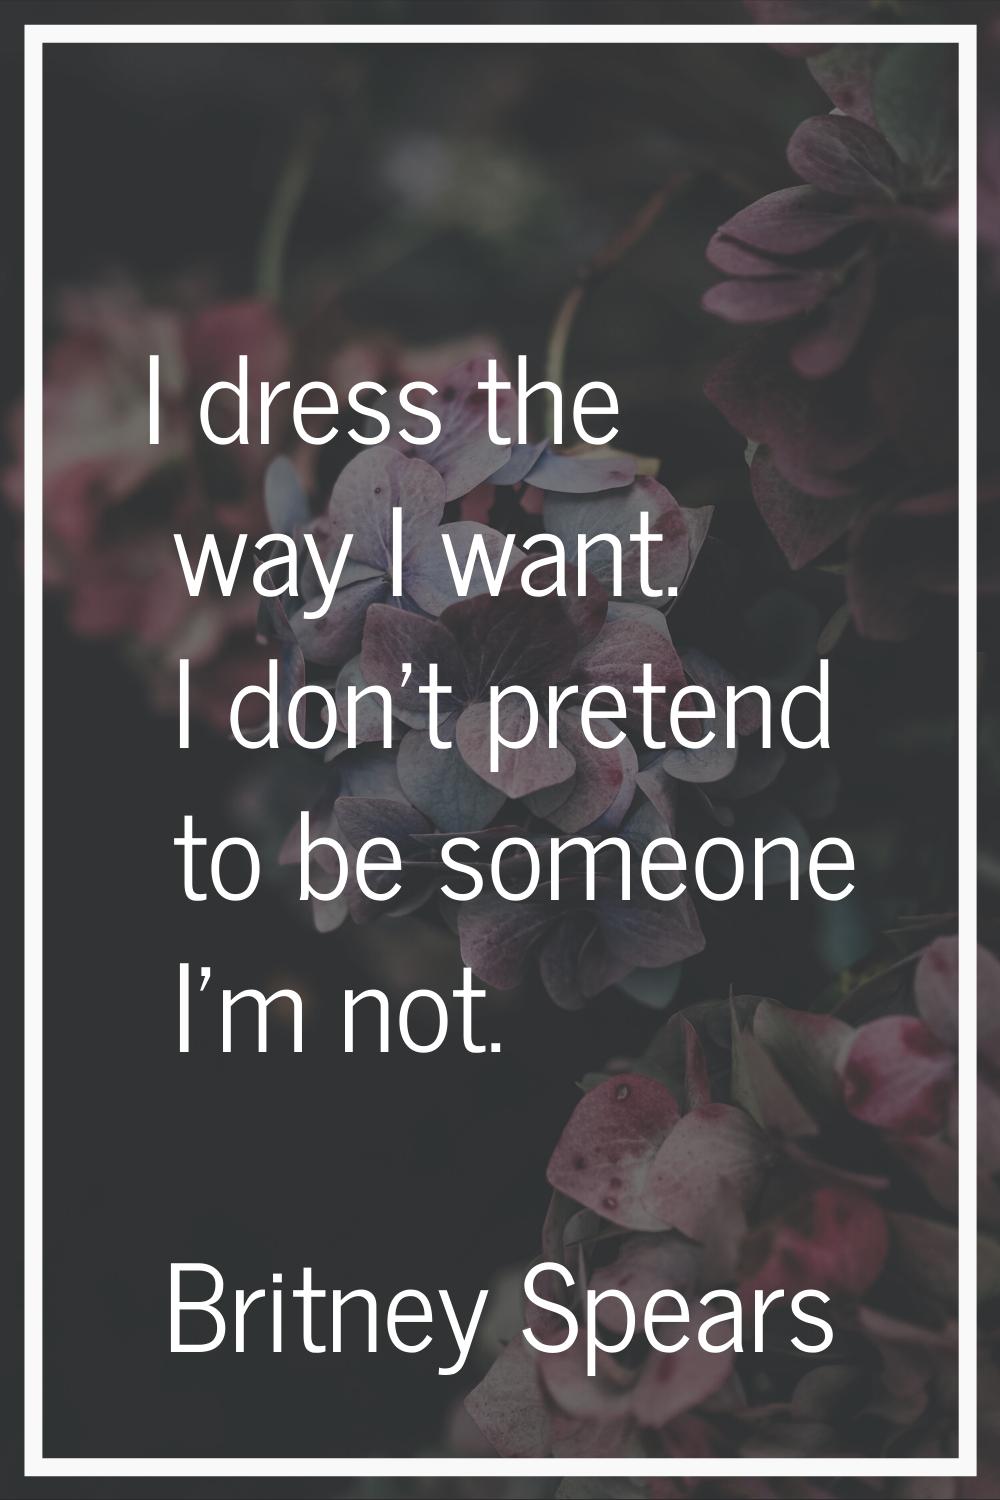 I dress the way I want. I don't pretend to be someone I'm not.